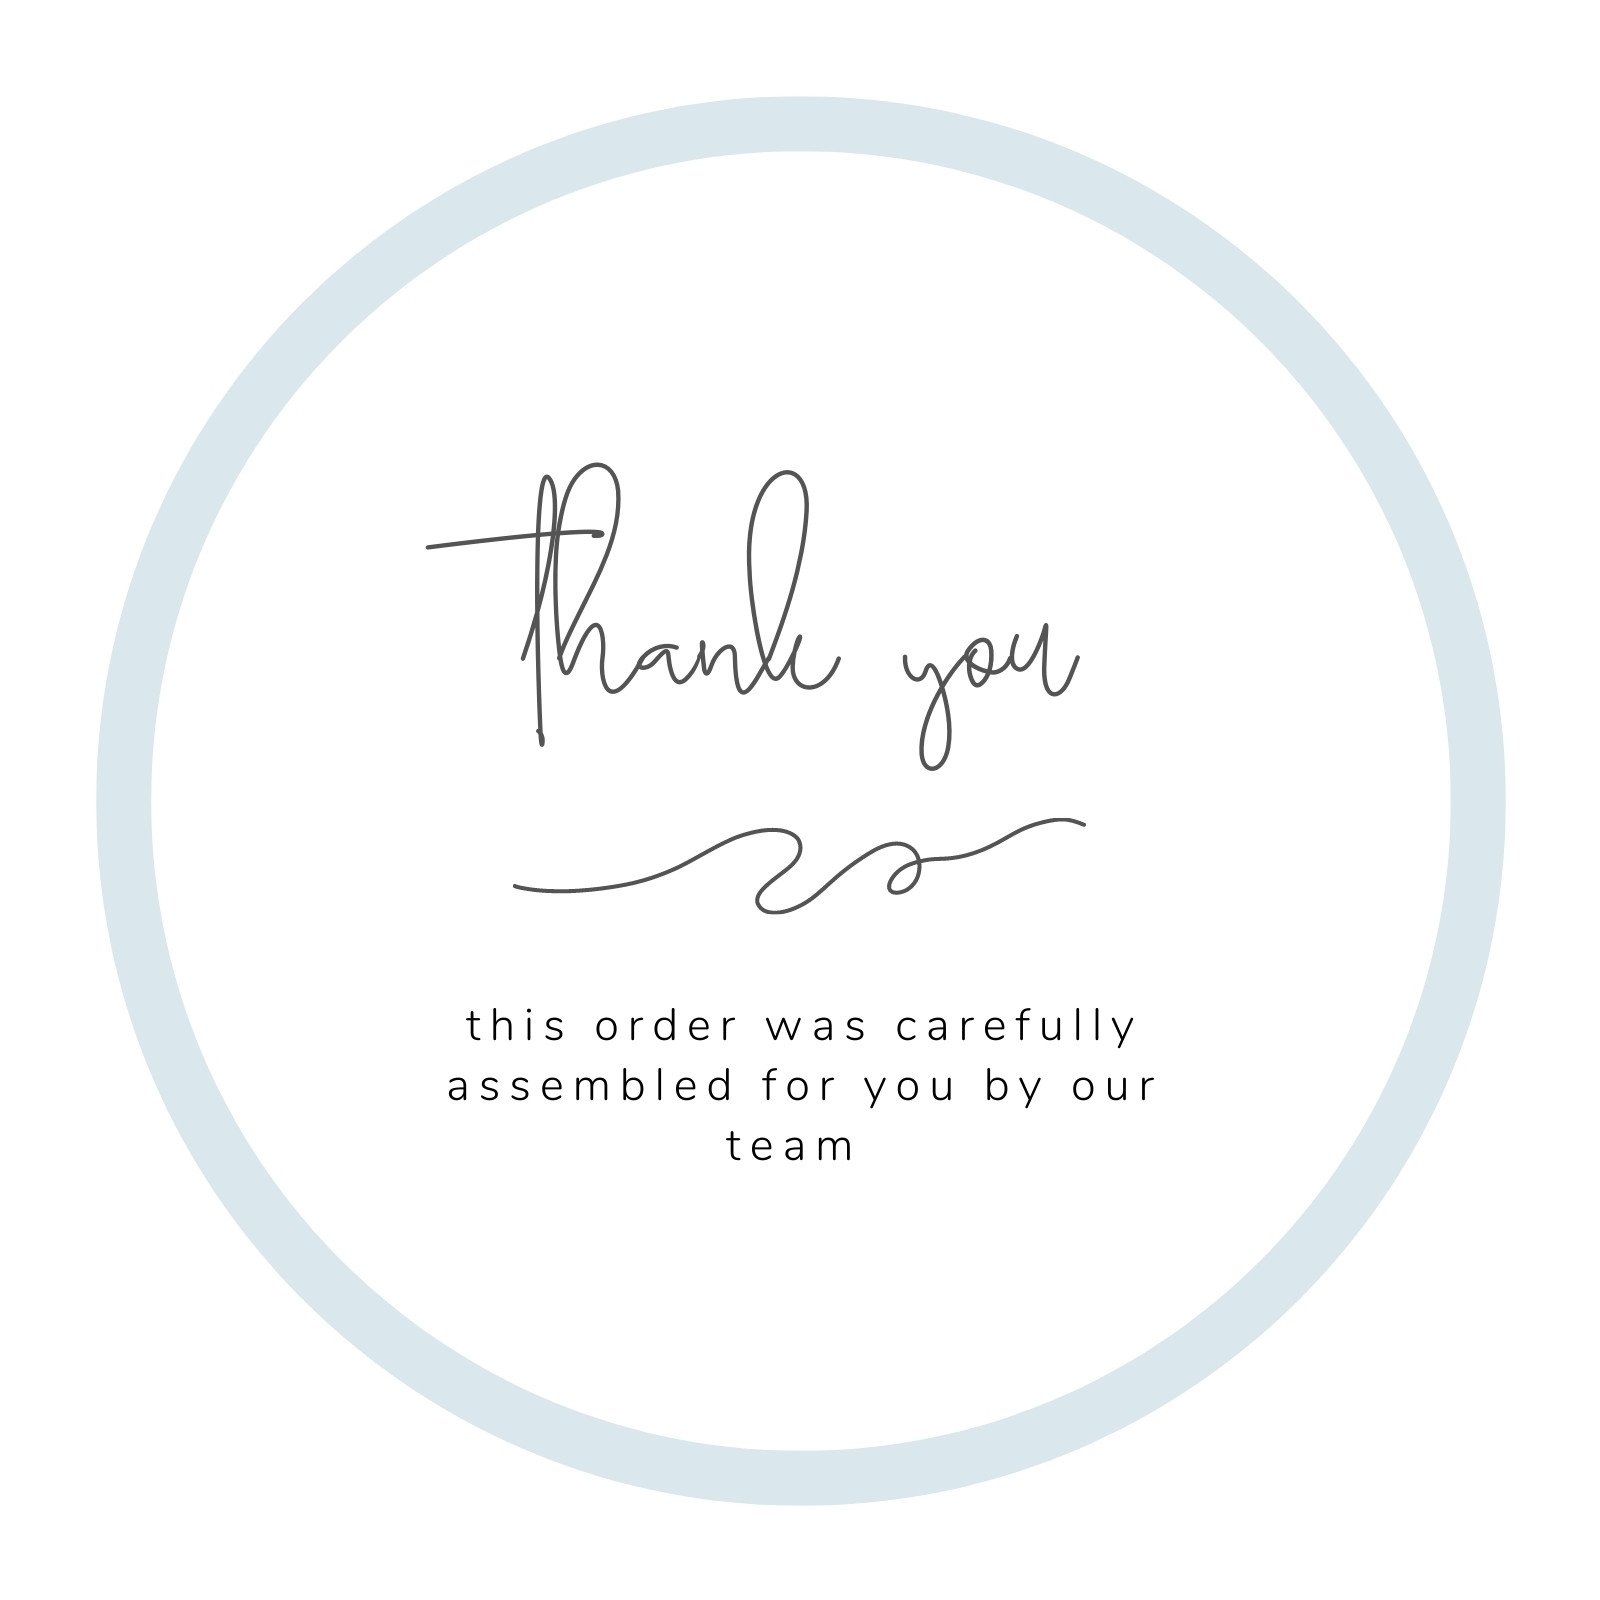 Free Printable Thank You For Your Business Tag { Business} 